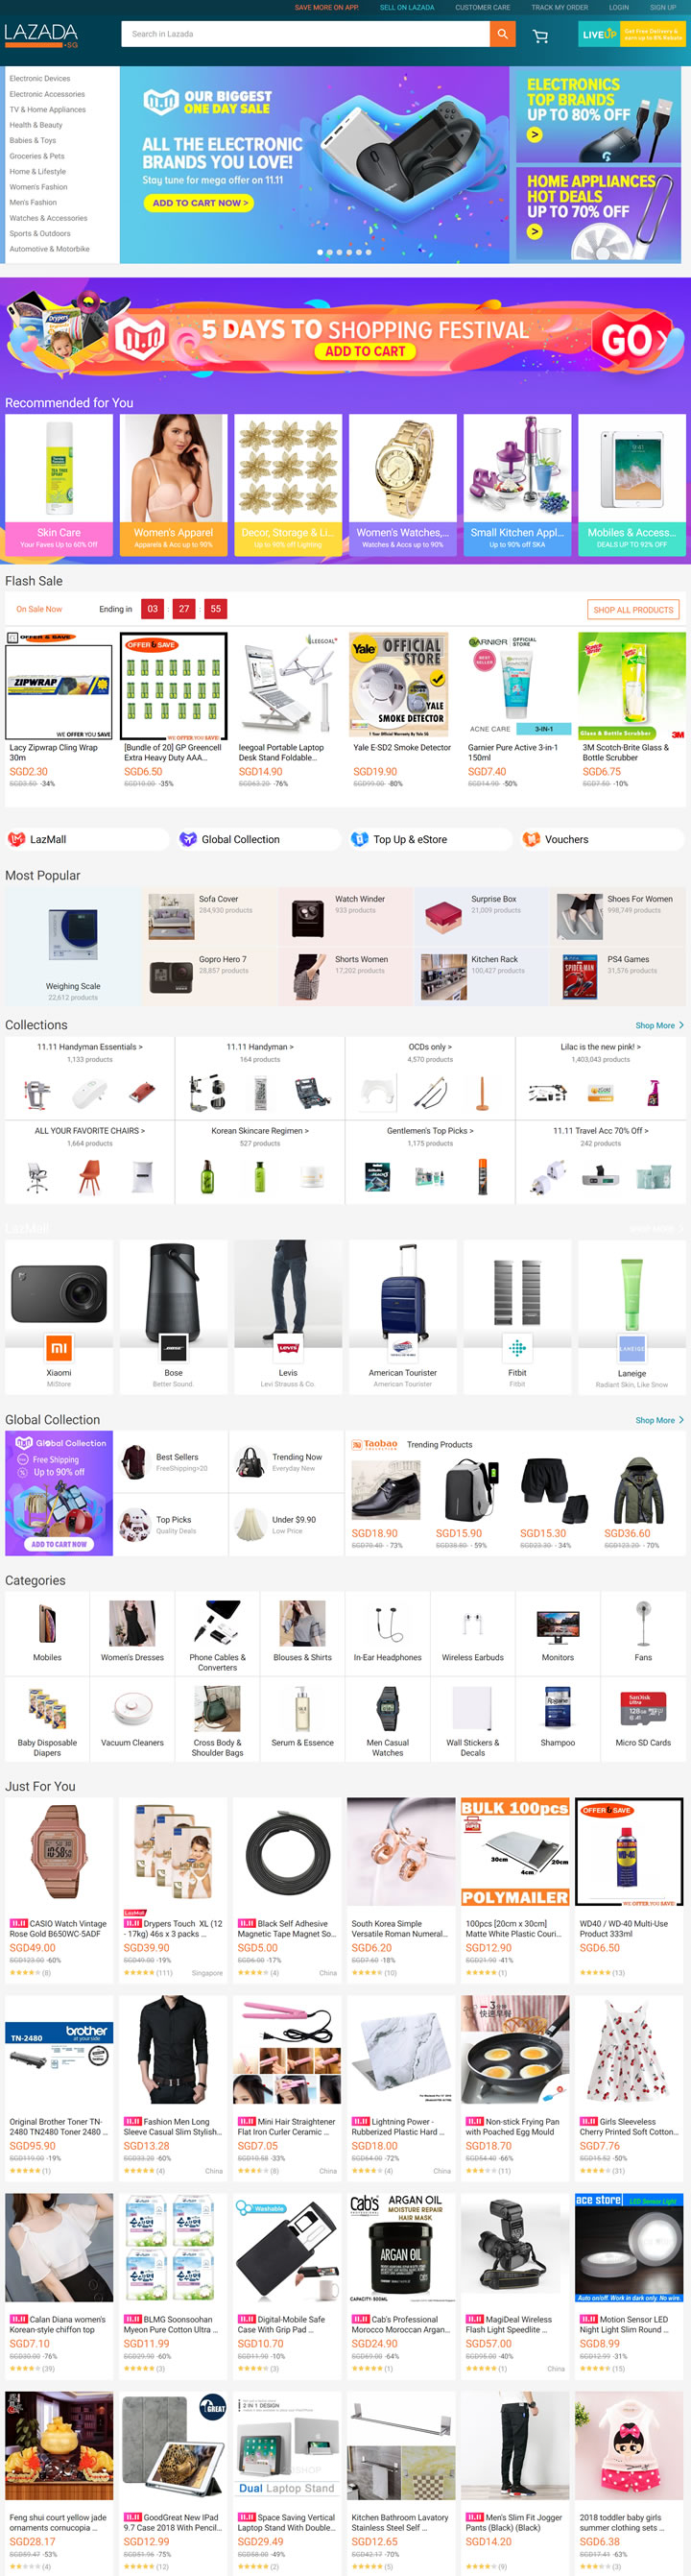 Online Shopping Mall in Singapore: Lazada Singapore